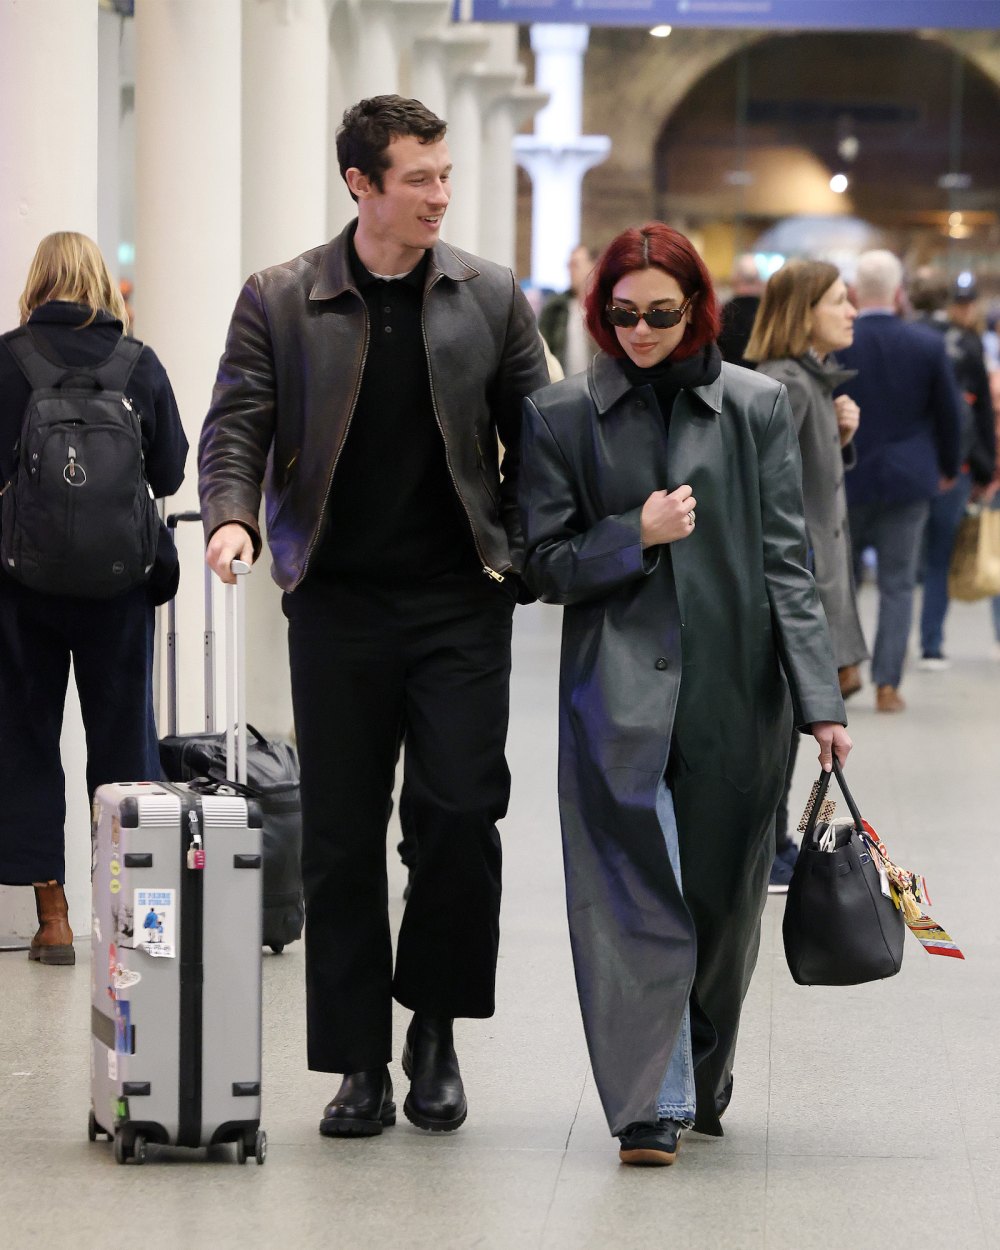 Feature Dua Lipa and Boyfriend Callum Turner Travel Together in Style in Coordinated Leather Jackets